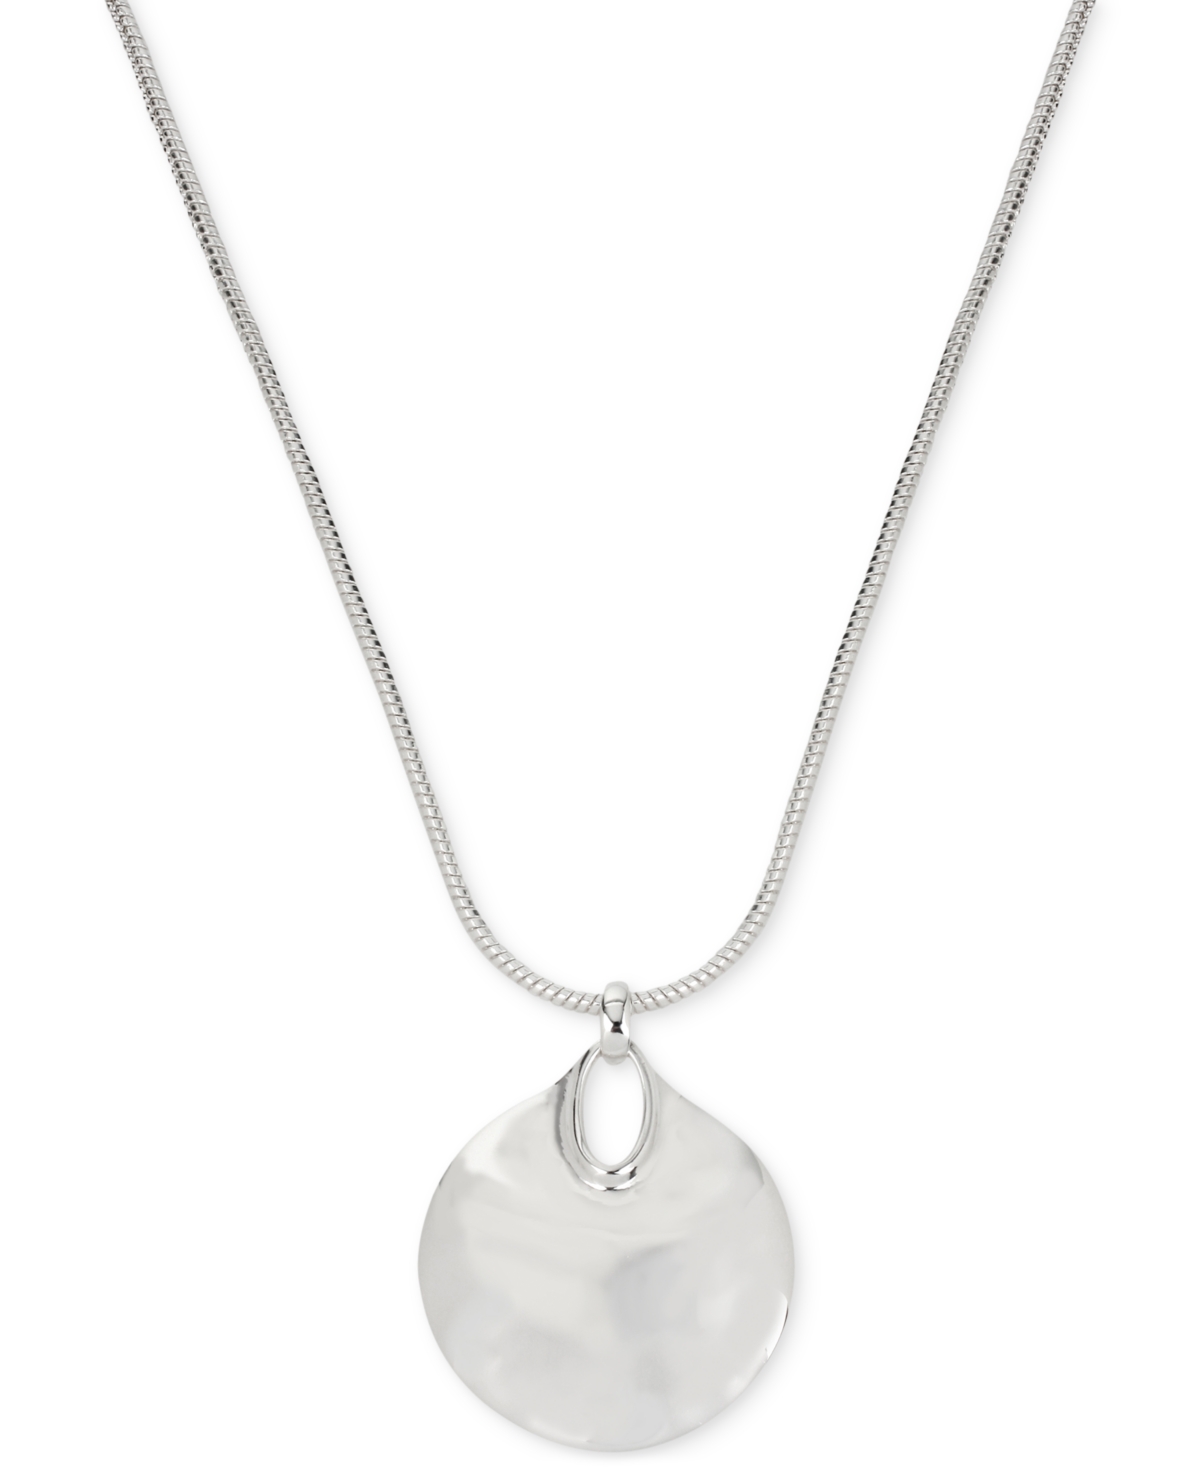 Silver-Tone Hammered Disc Pendant Necklace - Silver